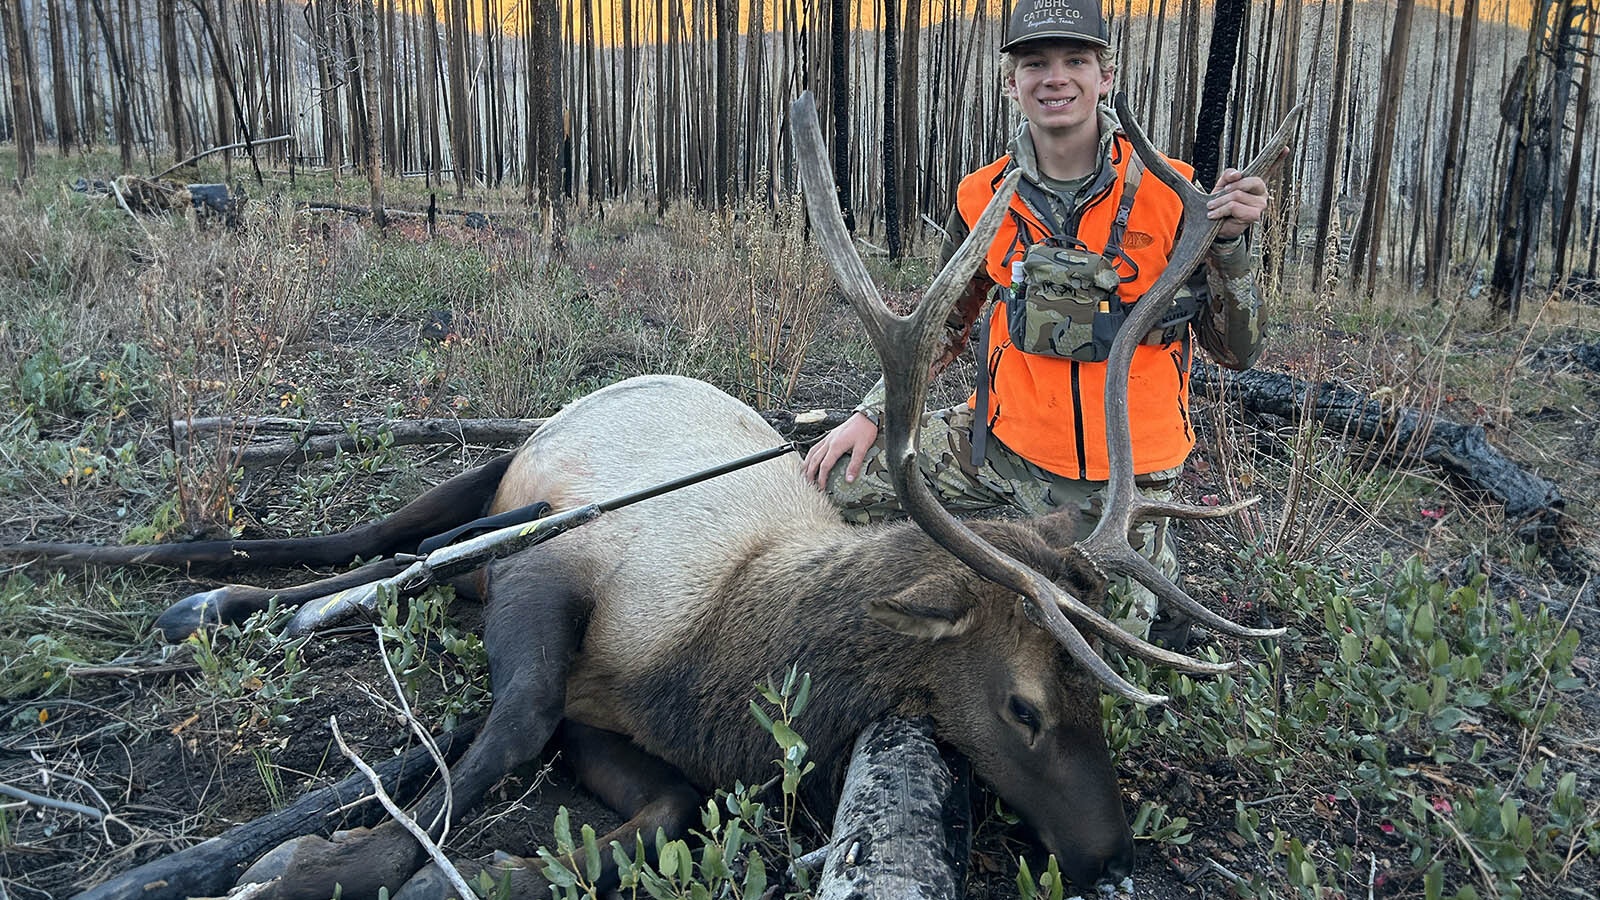 Lane Jones of Cheyenne has been hunting in Wyoming since he was old enough to follow his dad out into the field. He recently conducted a survey about other hunters’ thoughts on how technology is changing the sport.